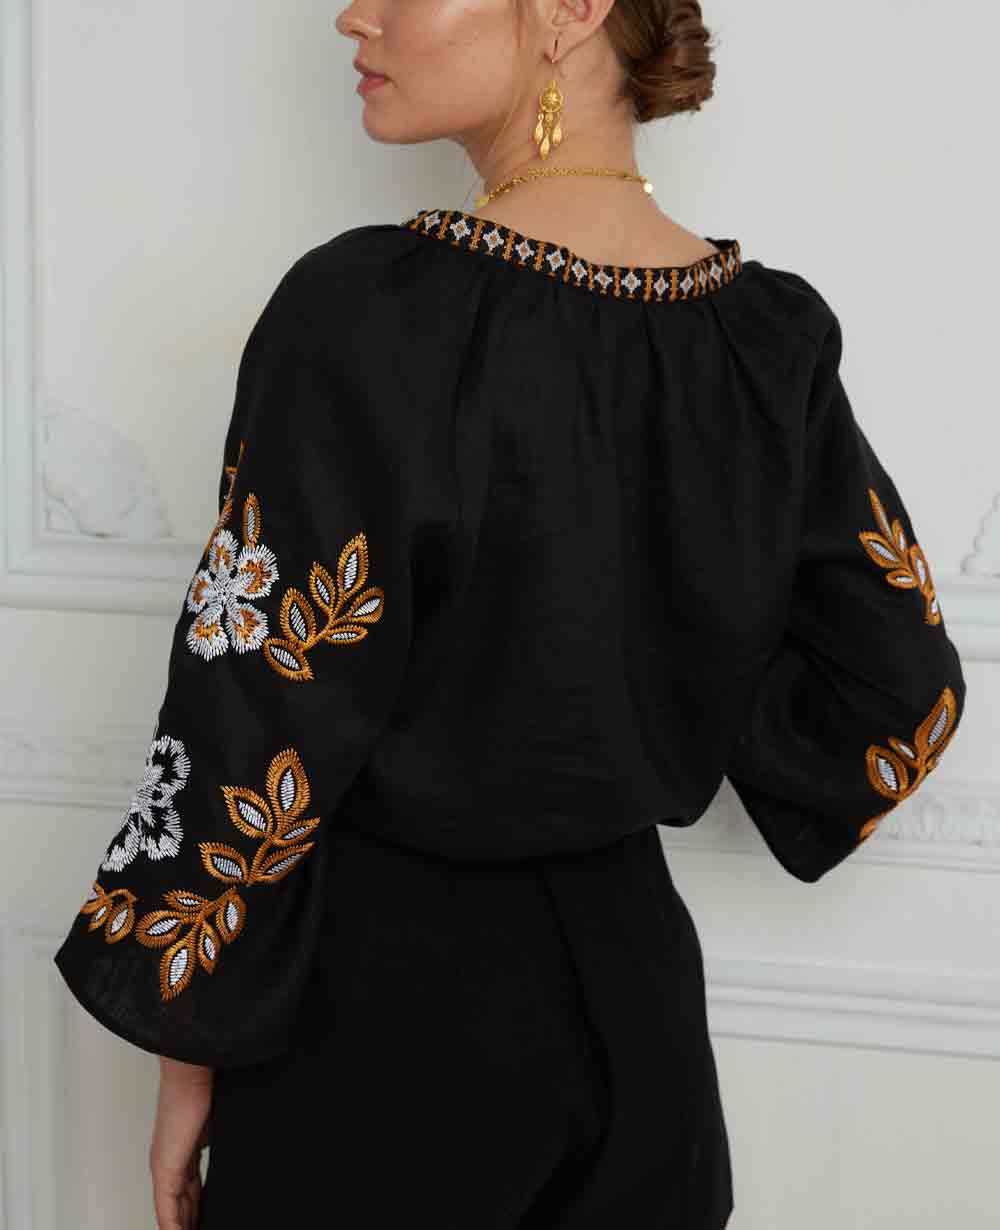 EMBROIDERED LINEN BLOUSE "ANTIGUA"